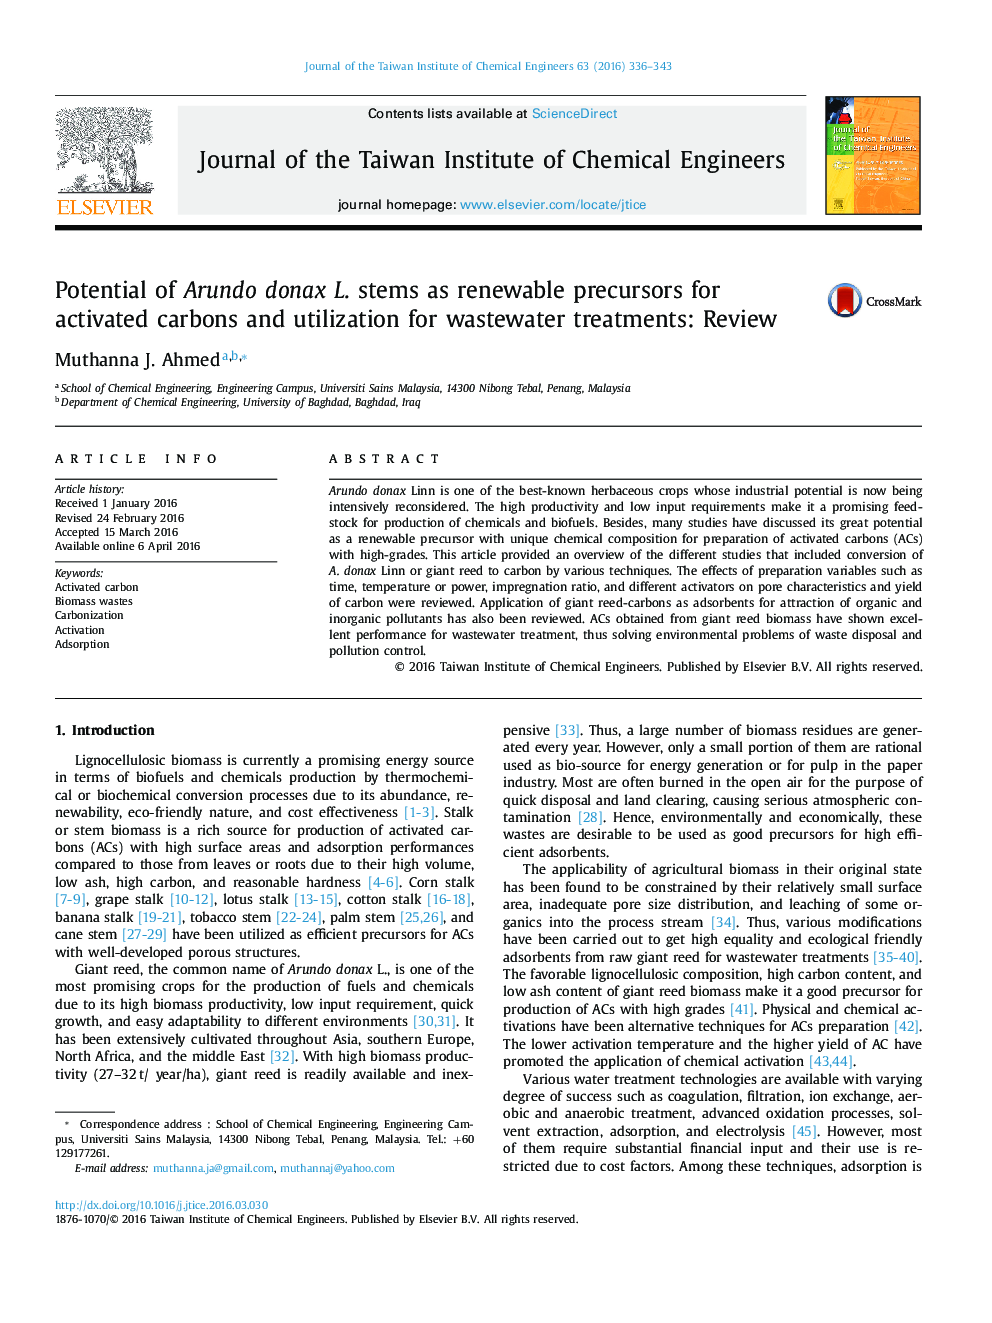 Potential of Arundo donax L. stems as renewable precursors for activated carbons and utilization for wastewater treatments: Review